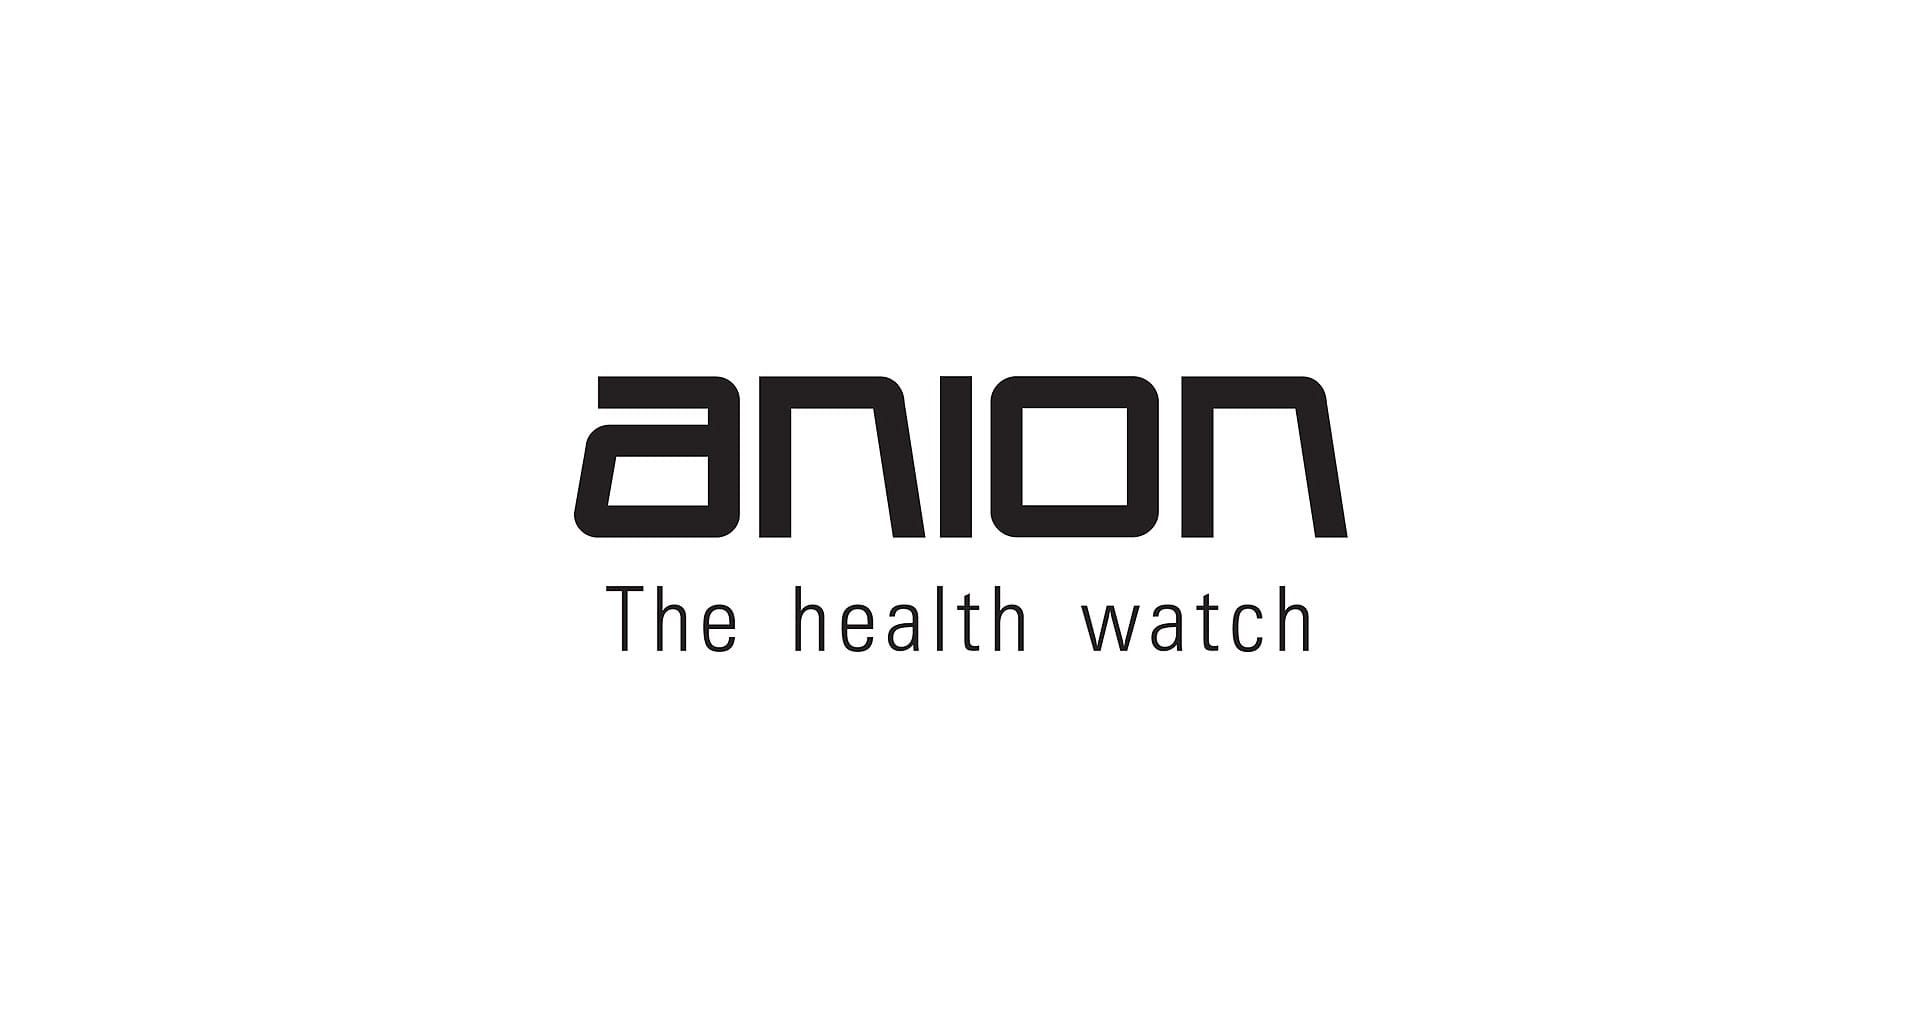 anion ,healthwatch ,steps ,germanium ,healthbenefits ,fitbit ,applewatches ,apple ,timepieces ,photography ,fitness ,fitbitlifestyle ,cartofapples